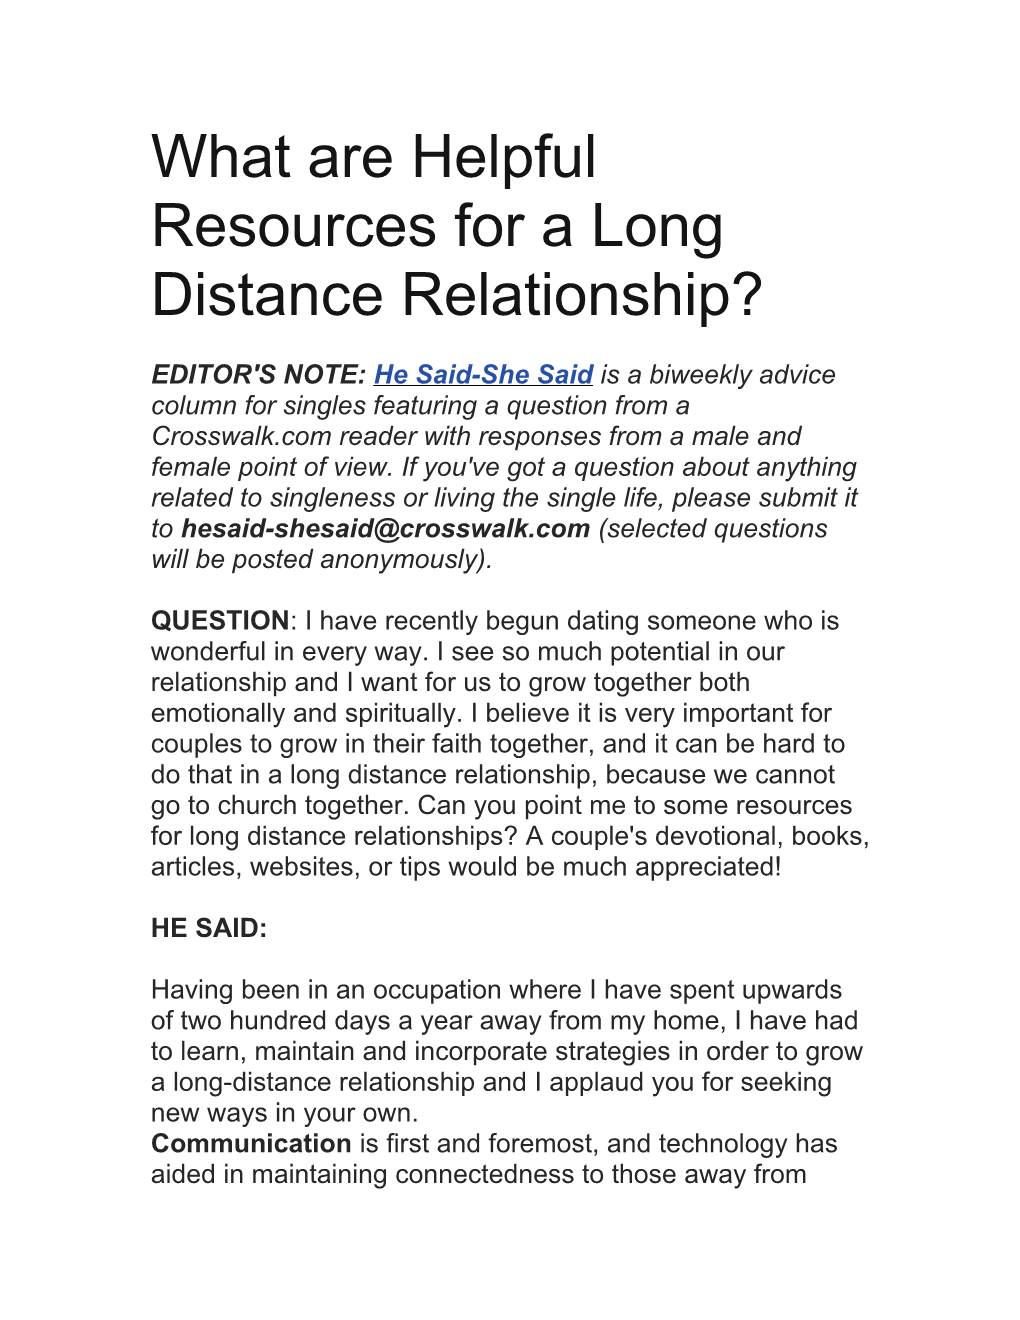 What Are Helpful Resources for a Long Distance Relationship?